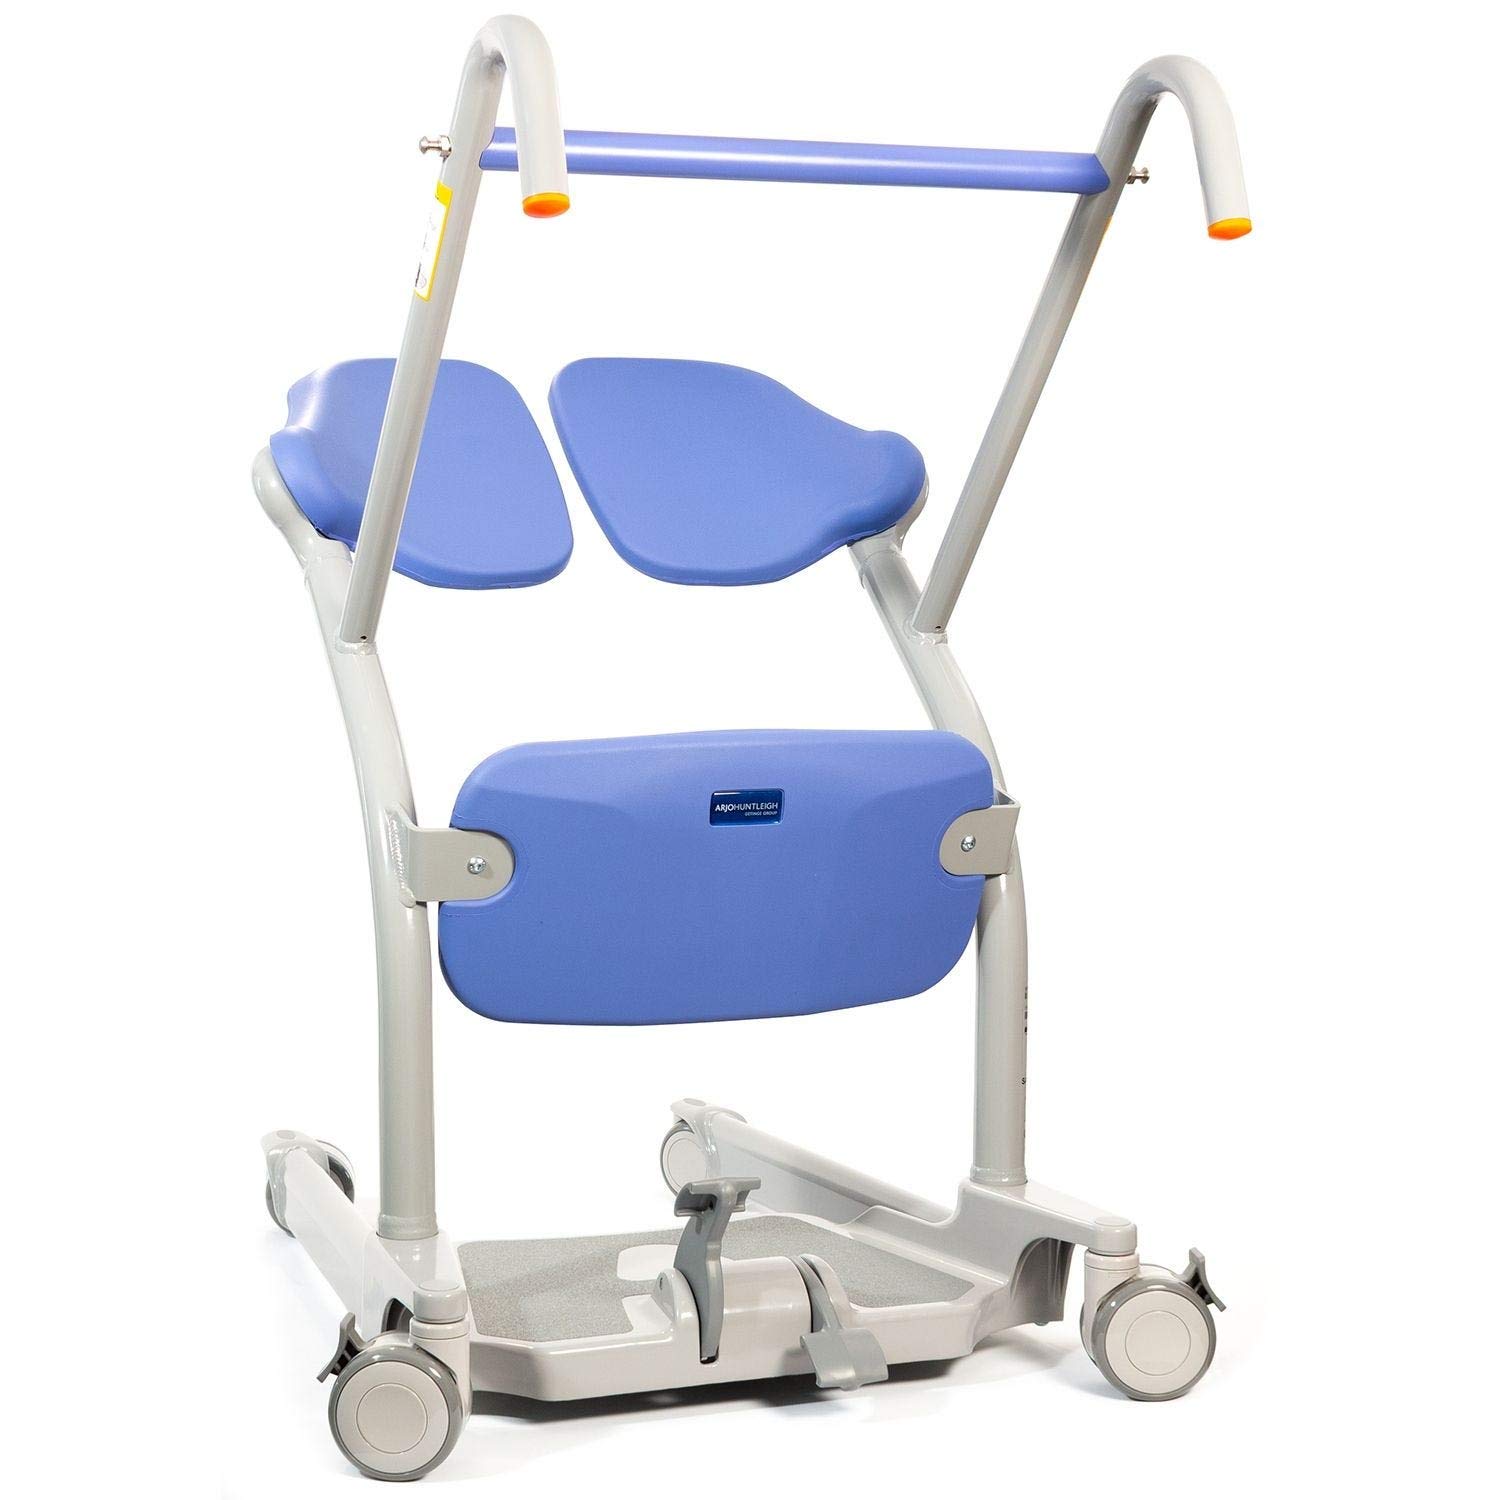 Compact ArjoHuntleigh Sara Stedy Sit to Stand Manual Patient Lift Aid | Fully Assembled Elderly Assistance Products | Holds up to 400 Pounds | Intended for Users 4'6